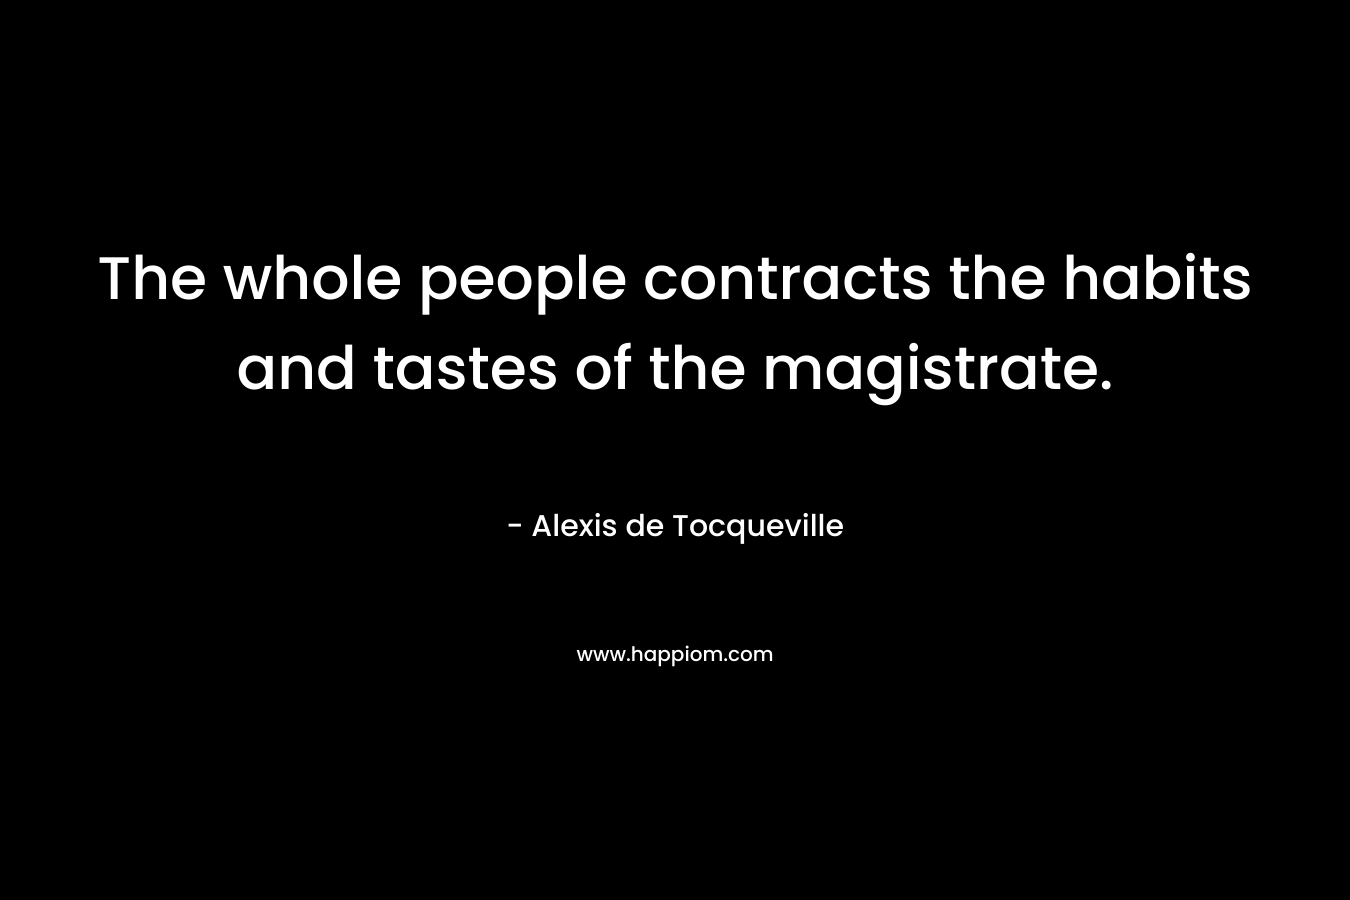 The whole people contracts the habits and tastes of the magistrate. – Alexis de Tocqueville